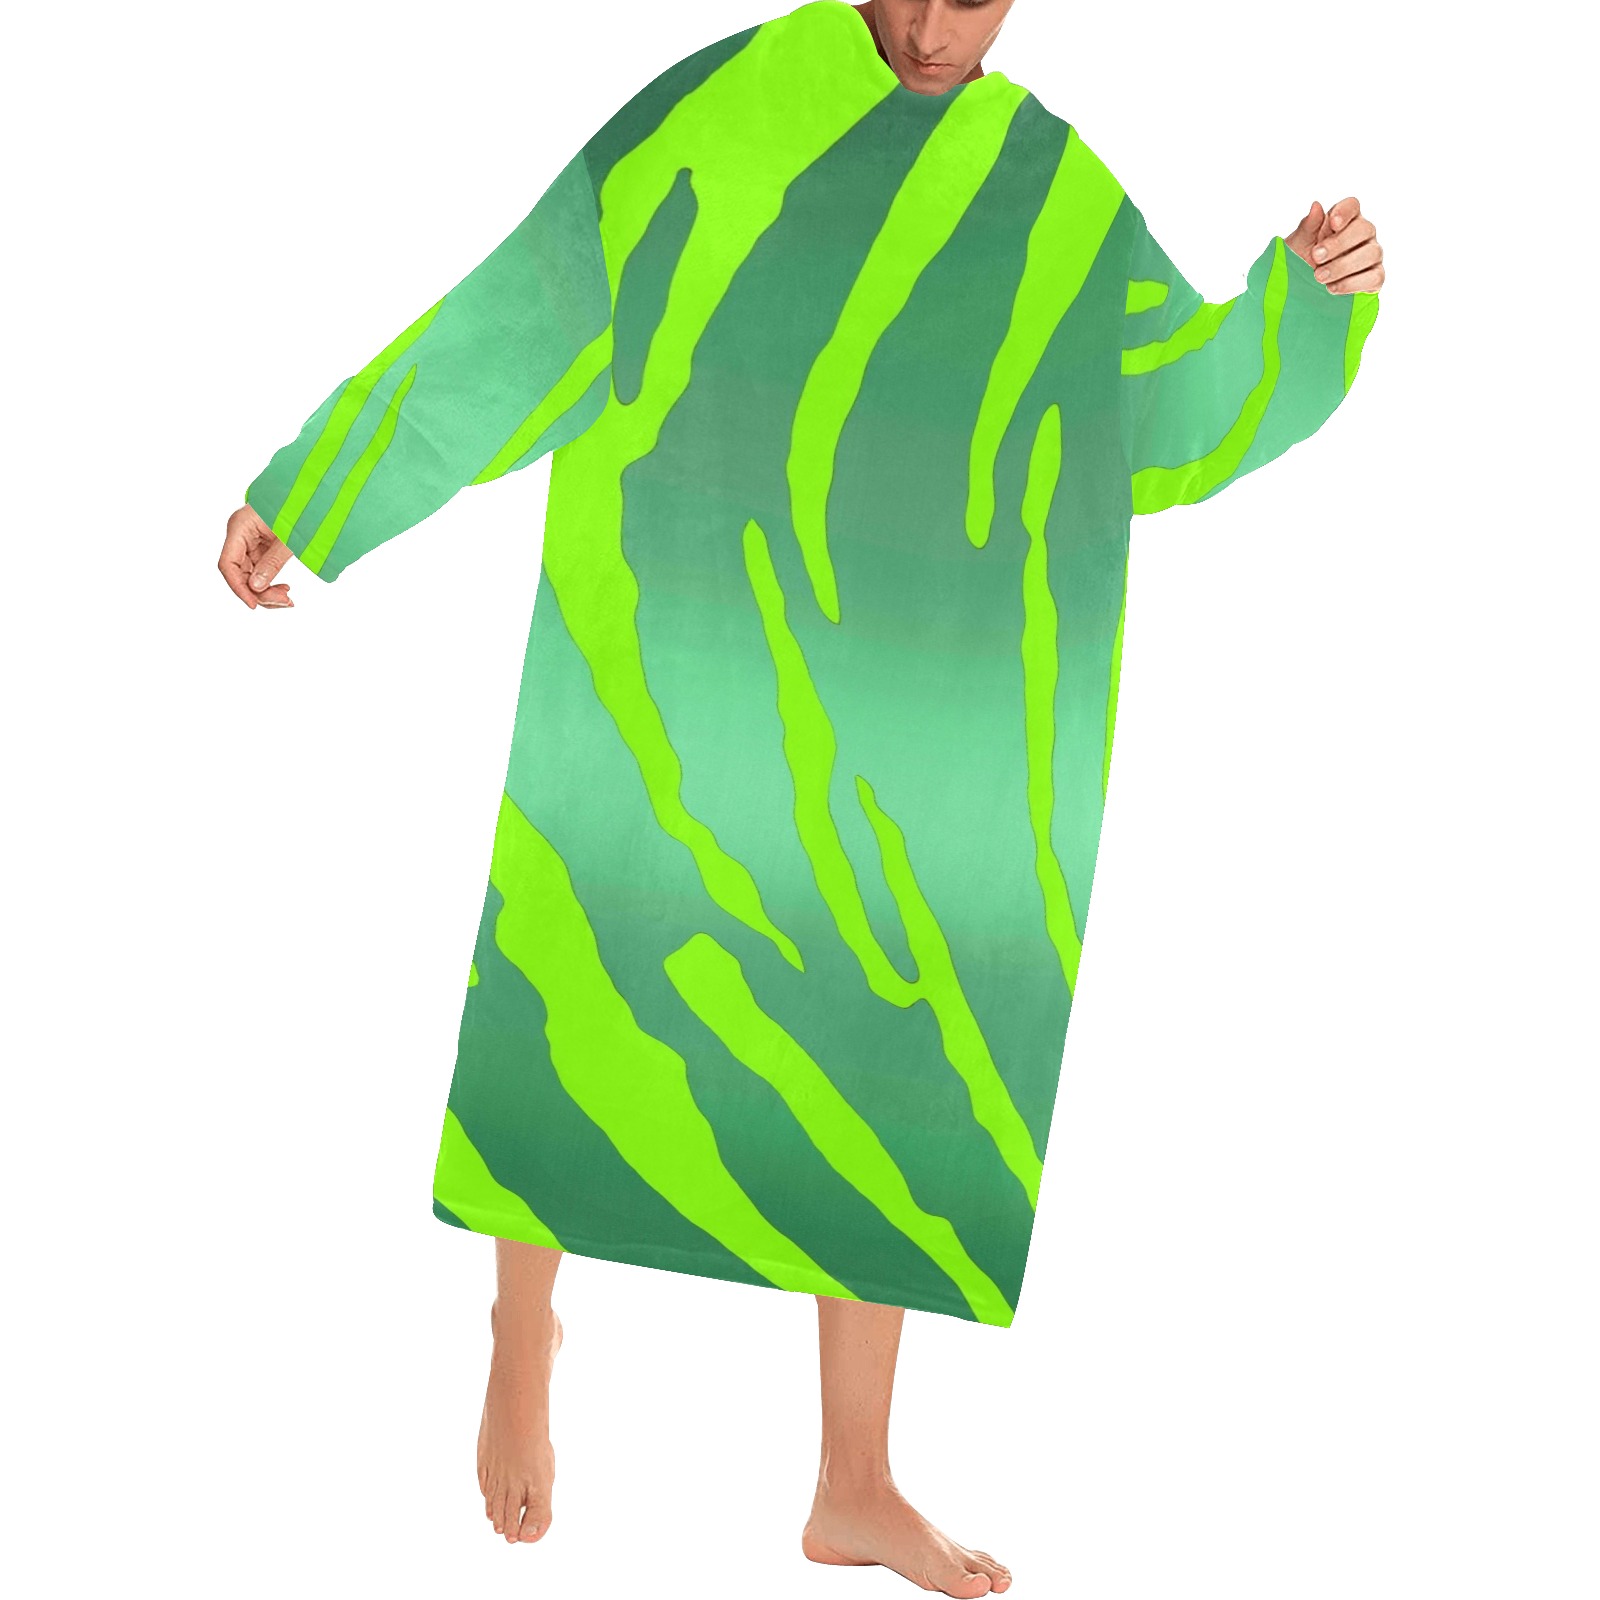 Metallic Tiger Stripes Greens Blanket Robe with Sleeves for Adults